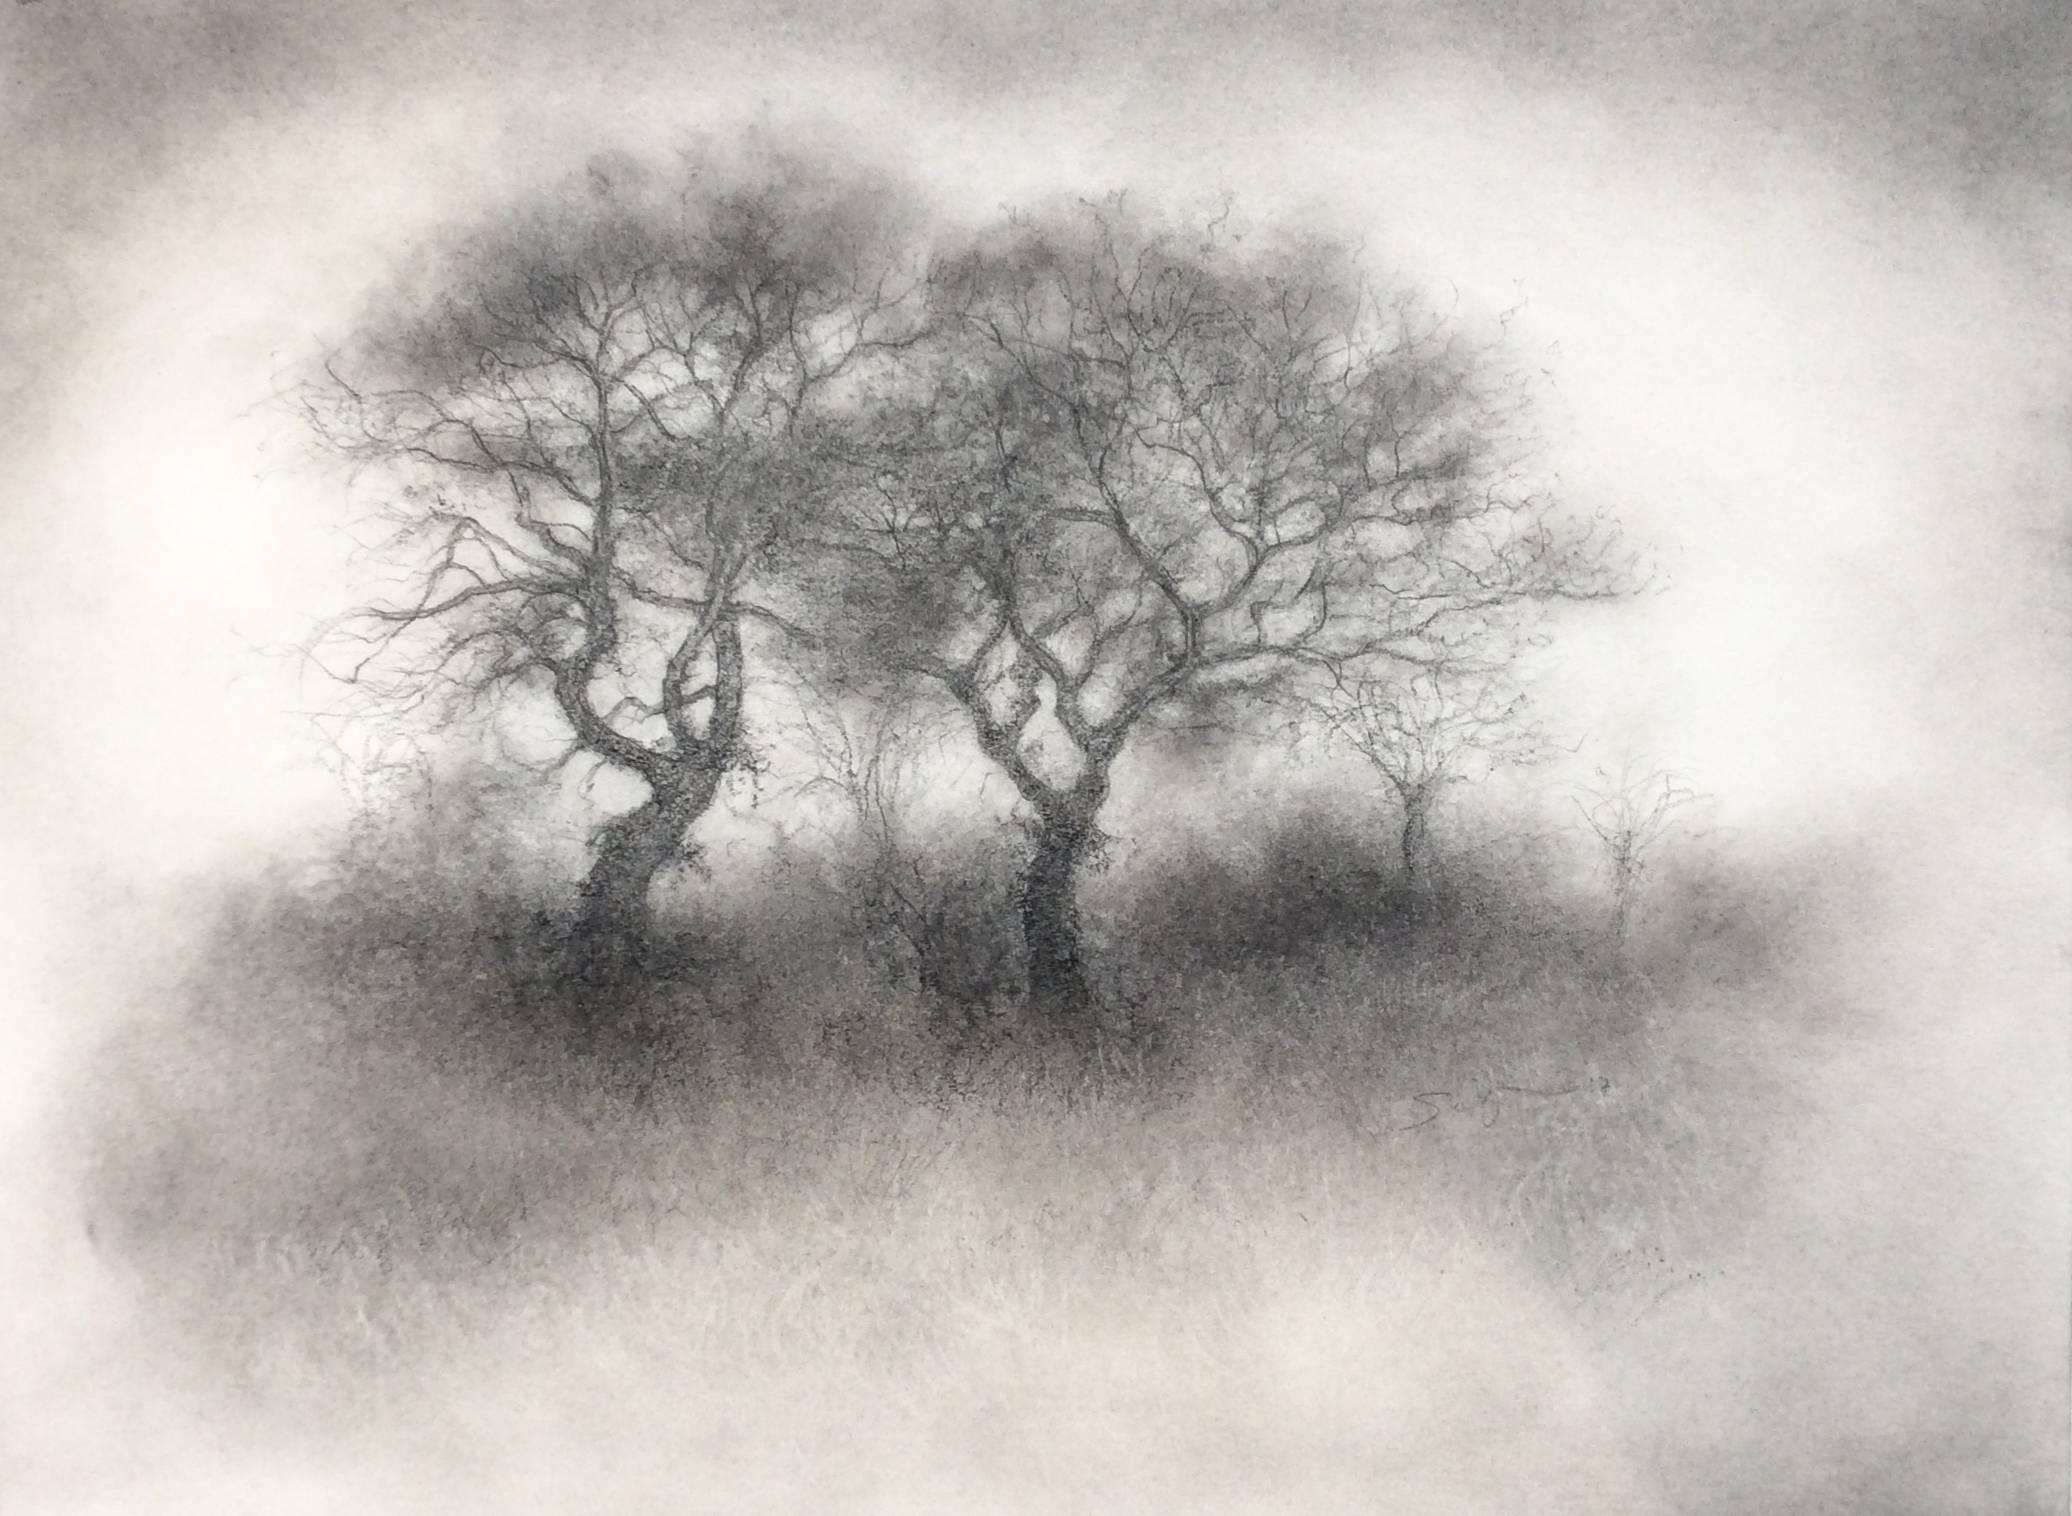 Sue Bryan Landscape Art - Two Trees (Contemporary Realistic Landscape Drawing in Black Charcoal)